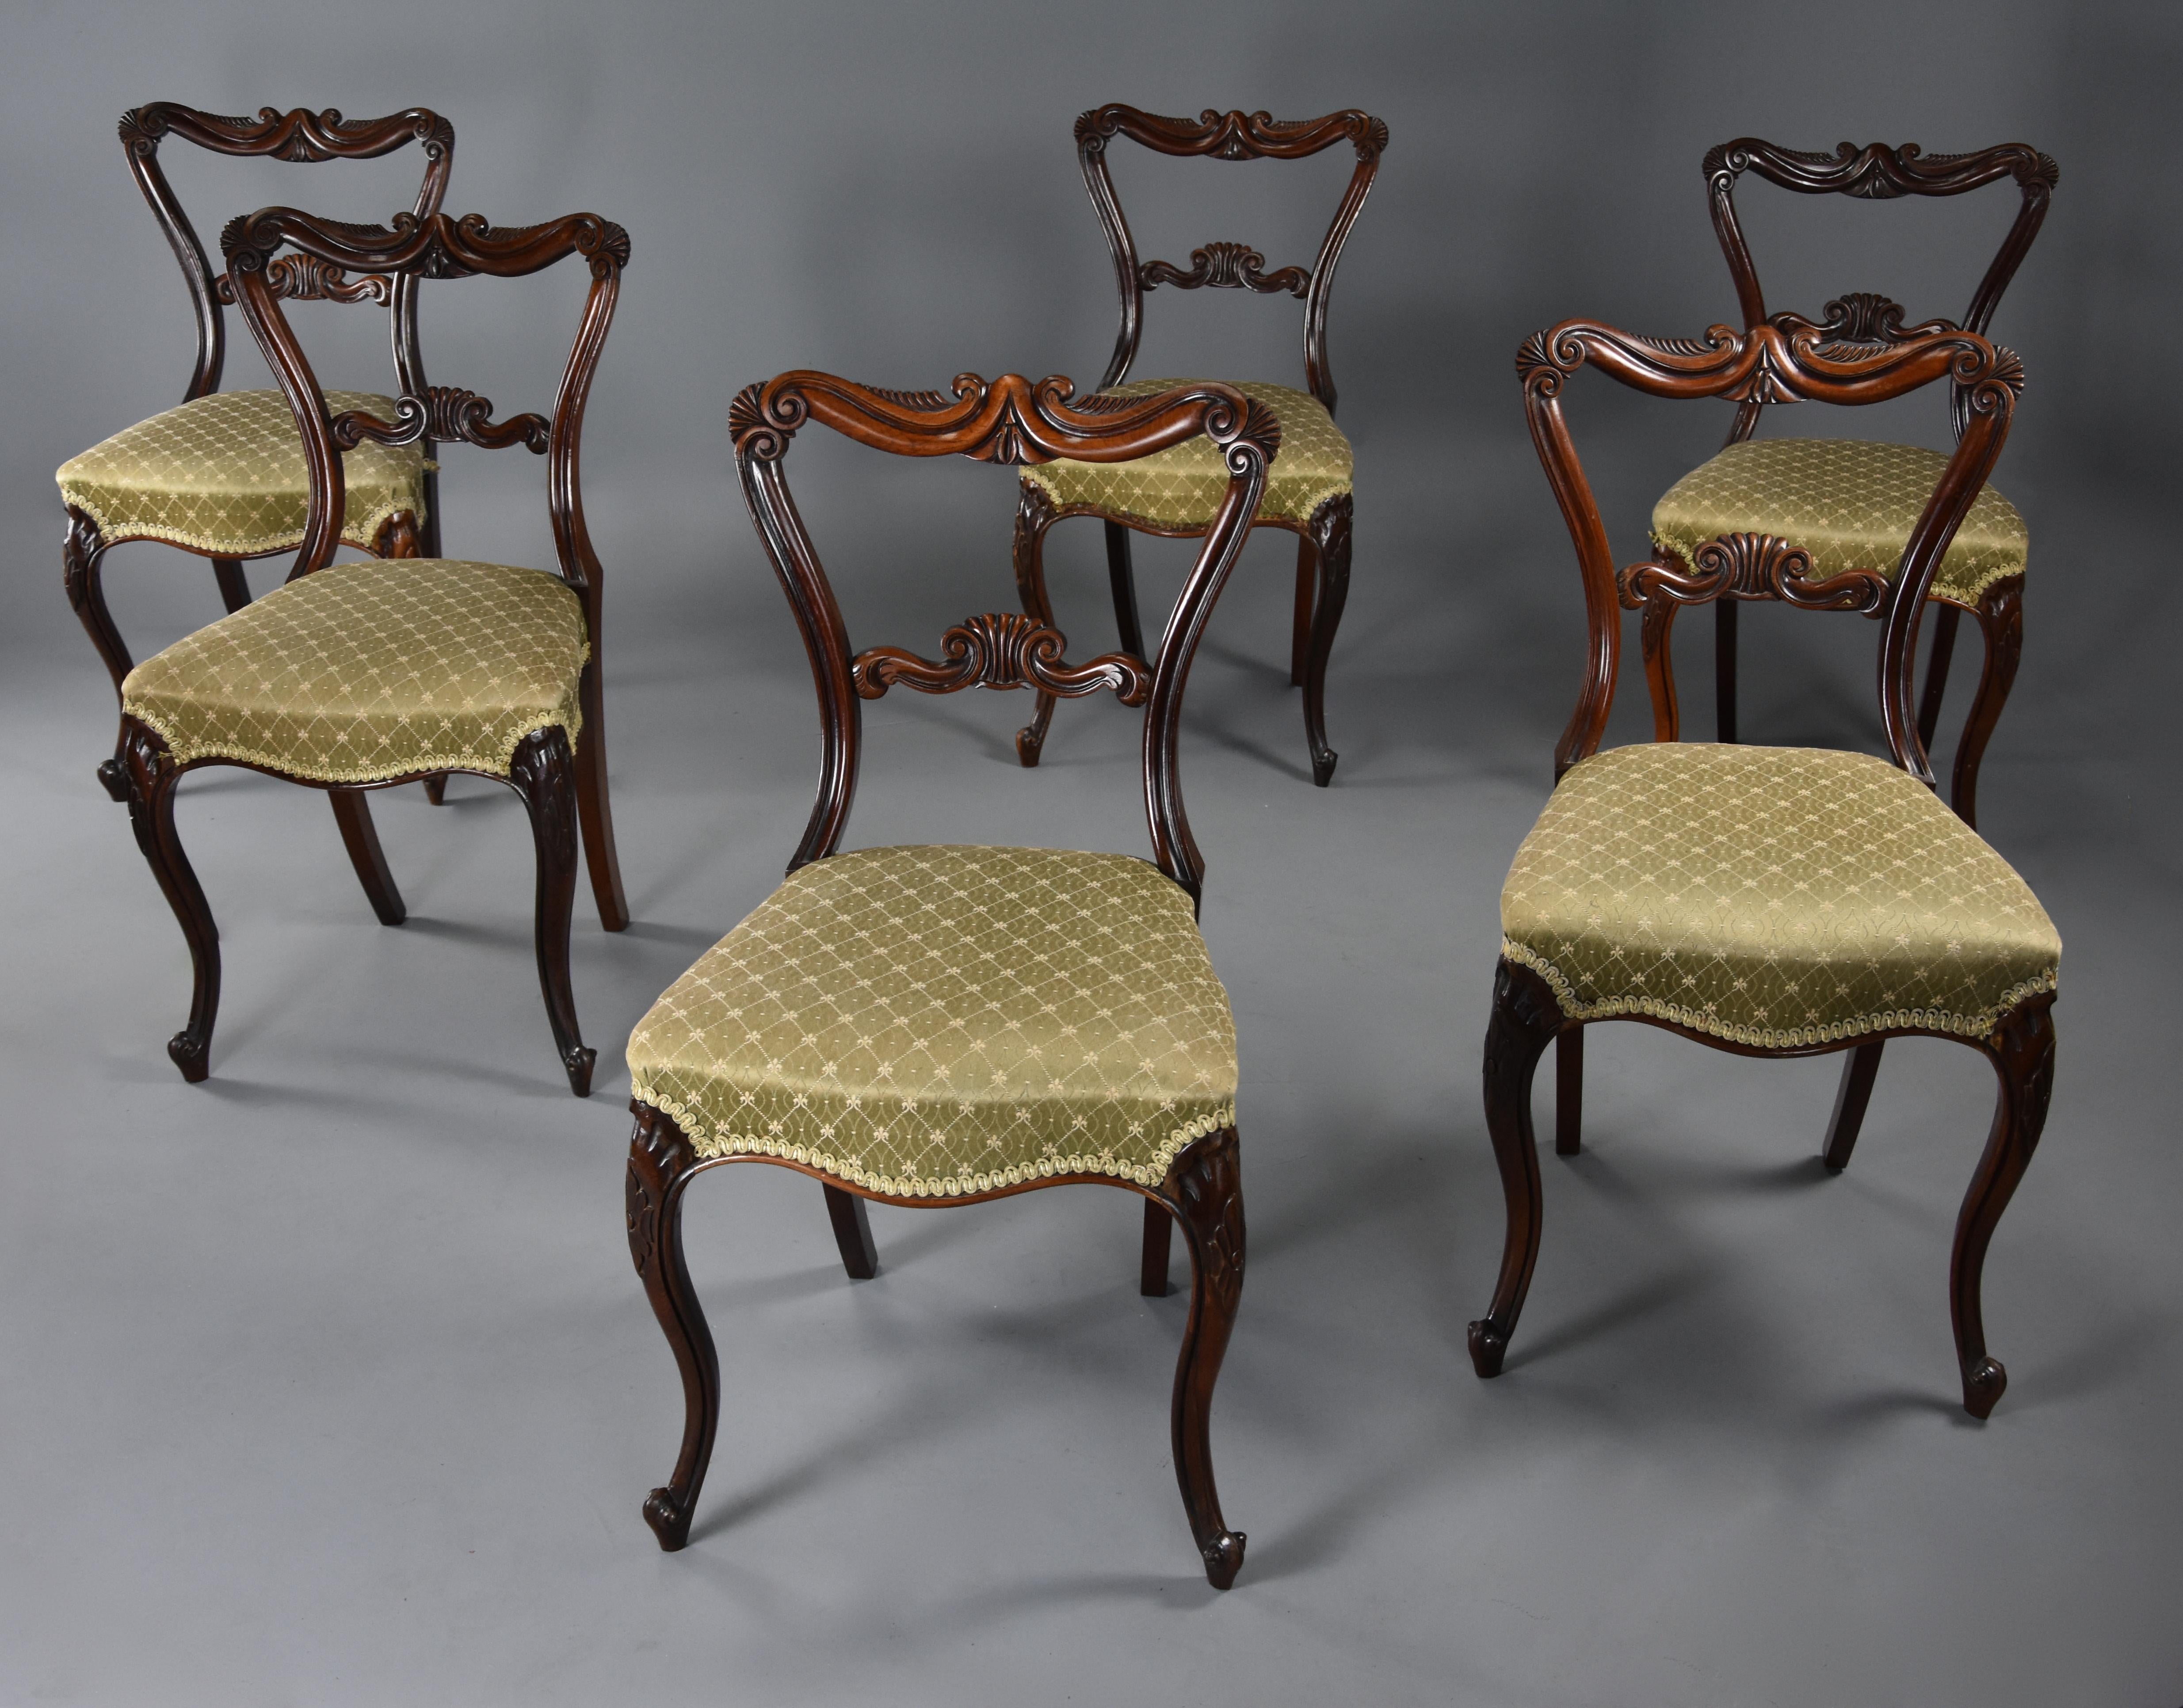 A fine quality early to mid-19th century (circa 1840) set of six rosewood dining chairs in the manner of Gillows.

This set of chairs consist of a finely carved top rail with scroll and fan decoration, a shaped and carved back support and shaped